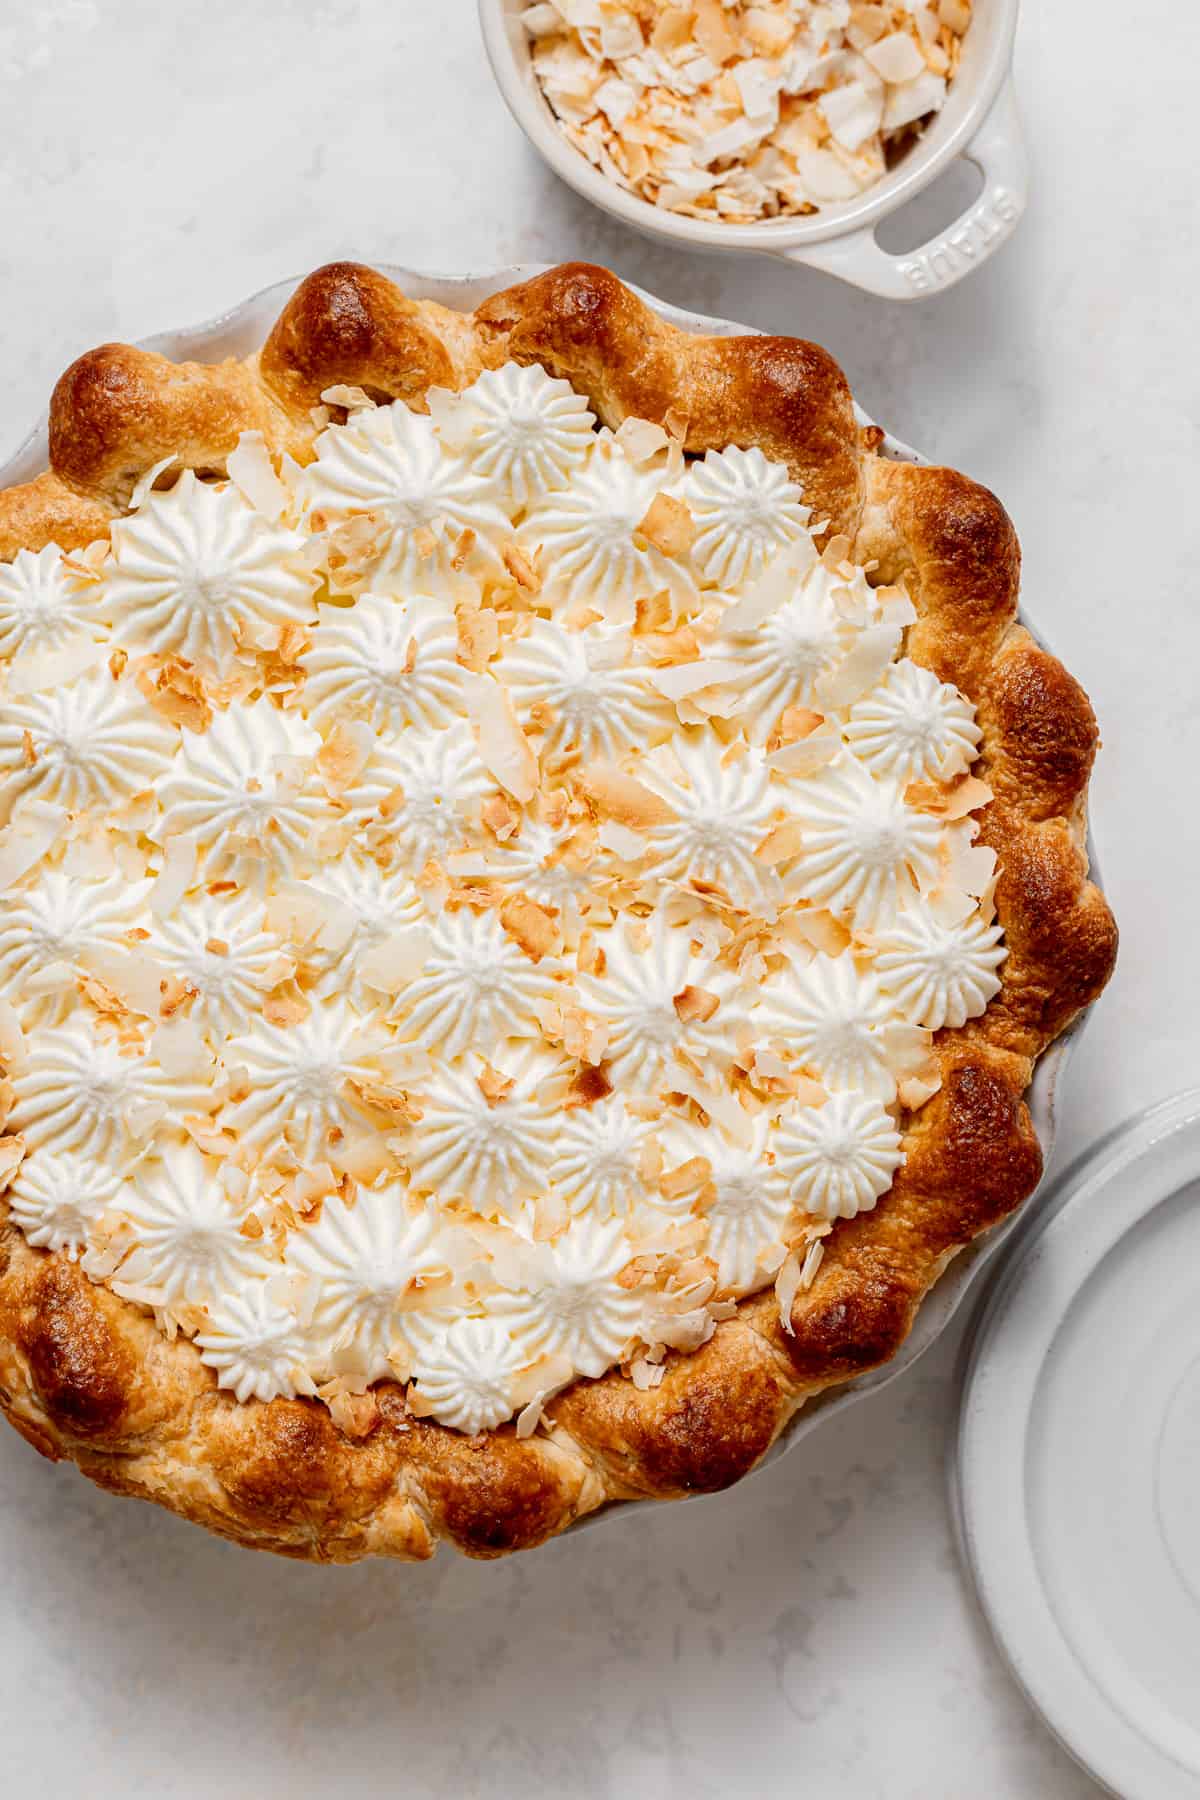 coconut pie with piped whipped cream and toasted coconut on top.